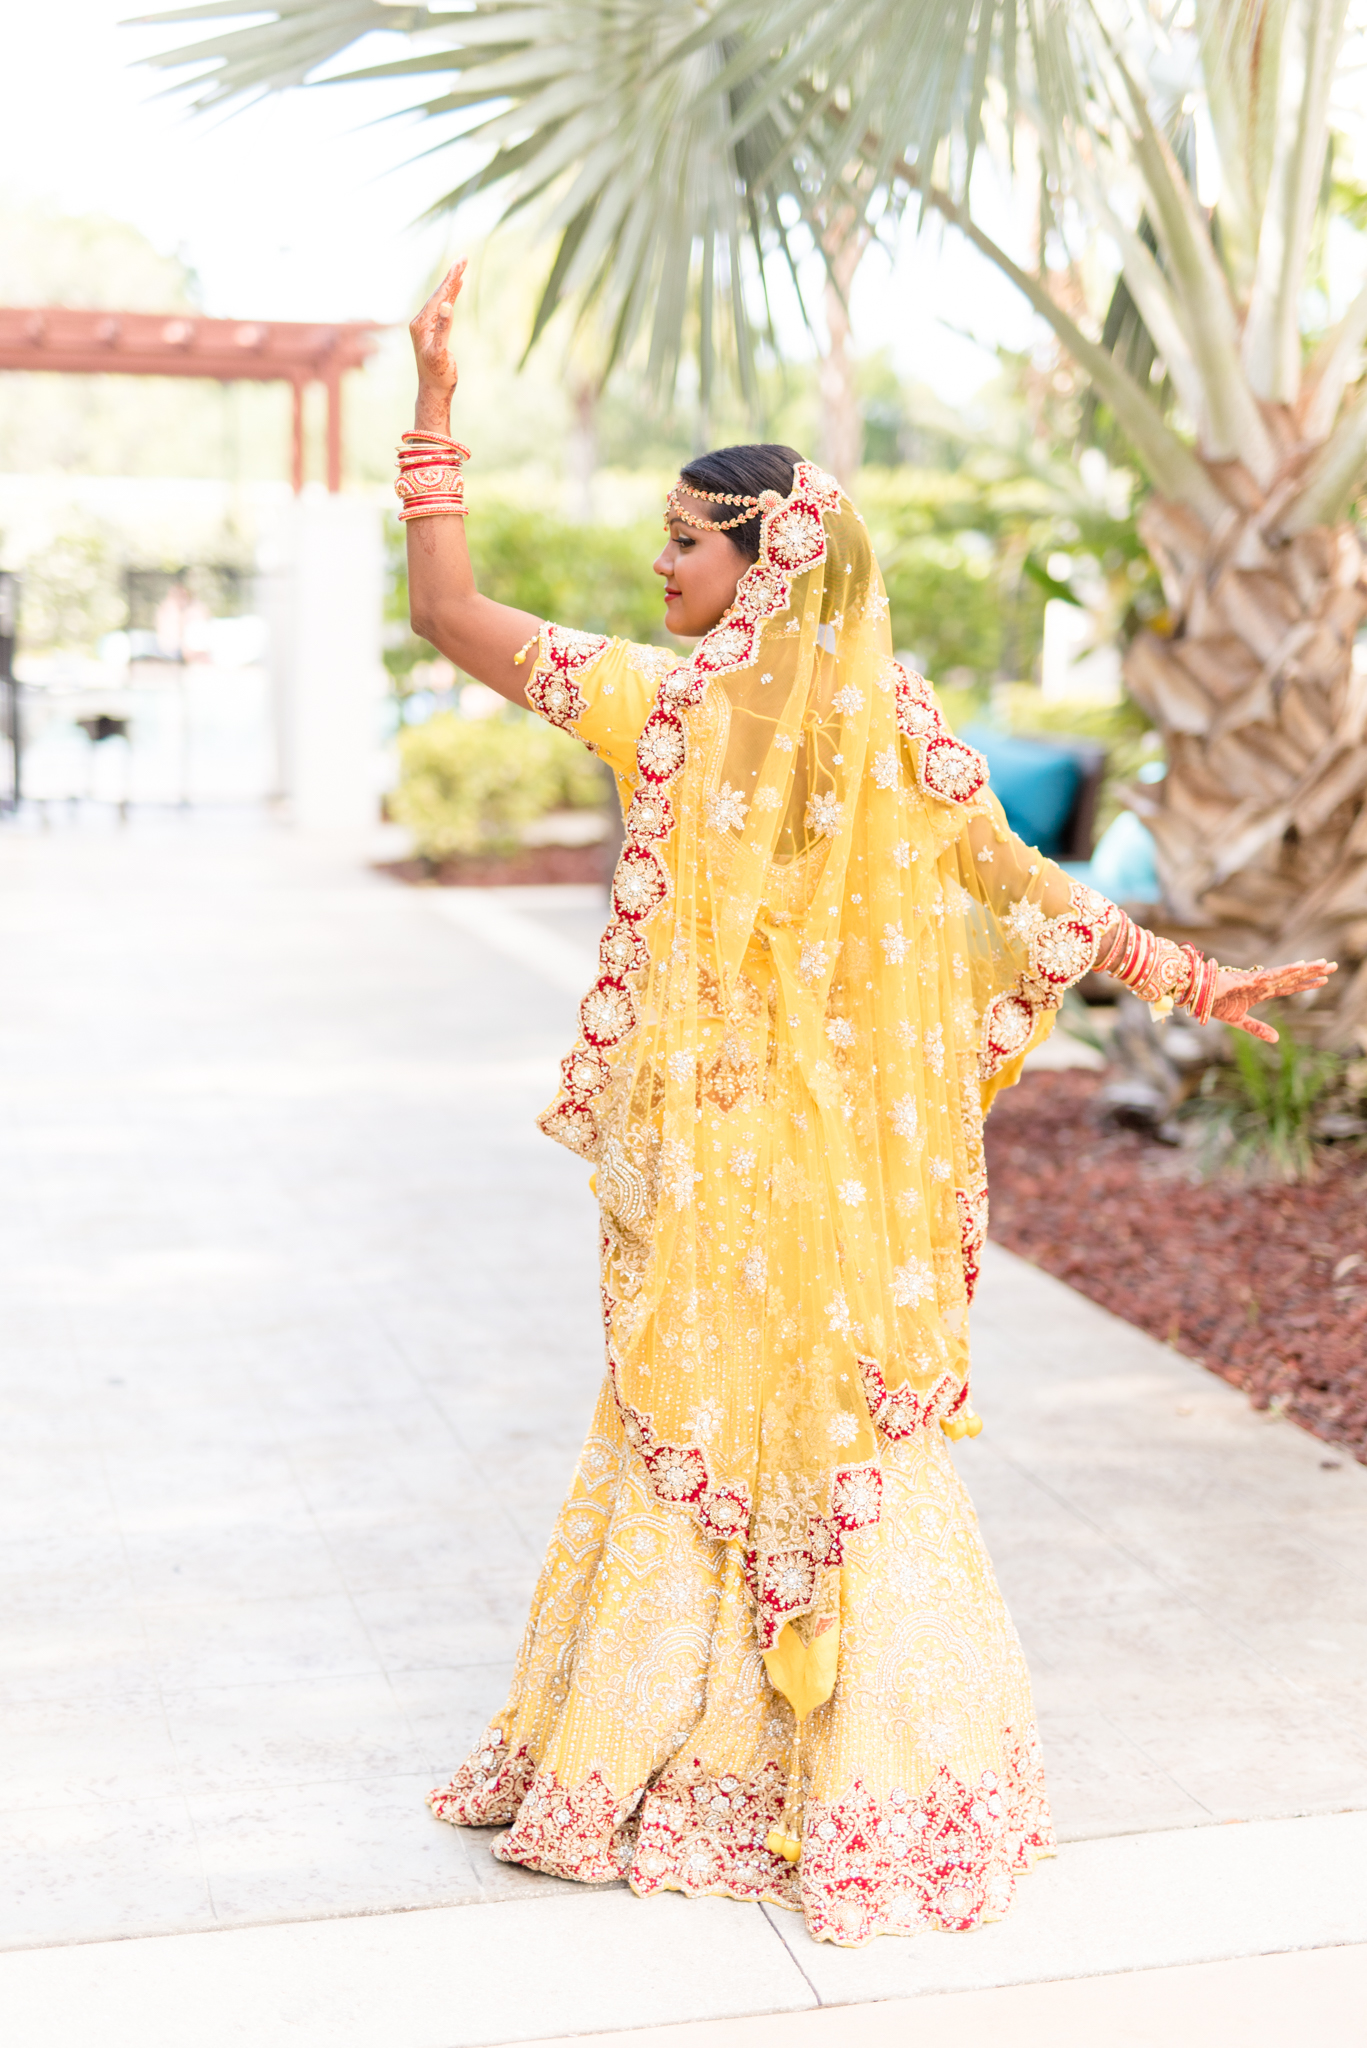 Bride poses in Indian wedding dress.